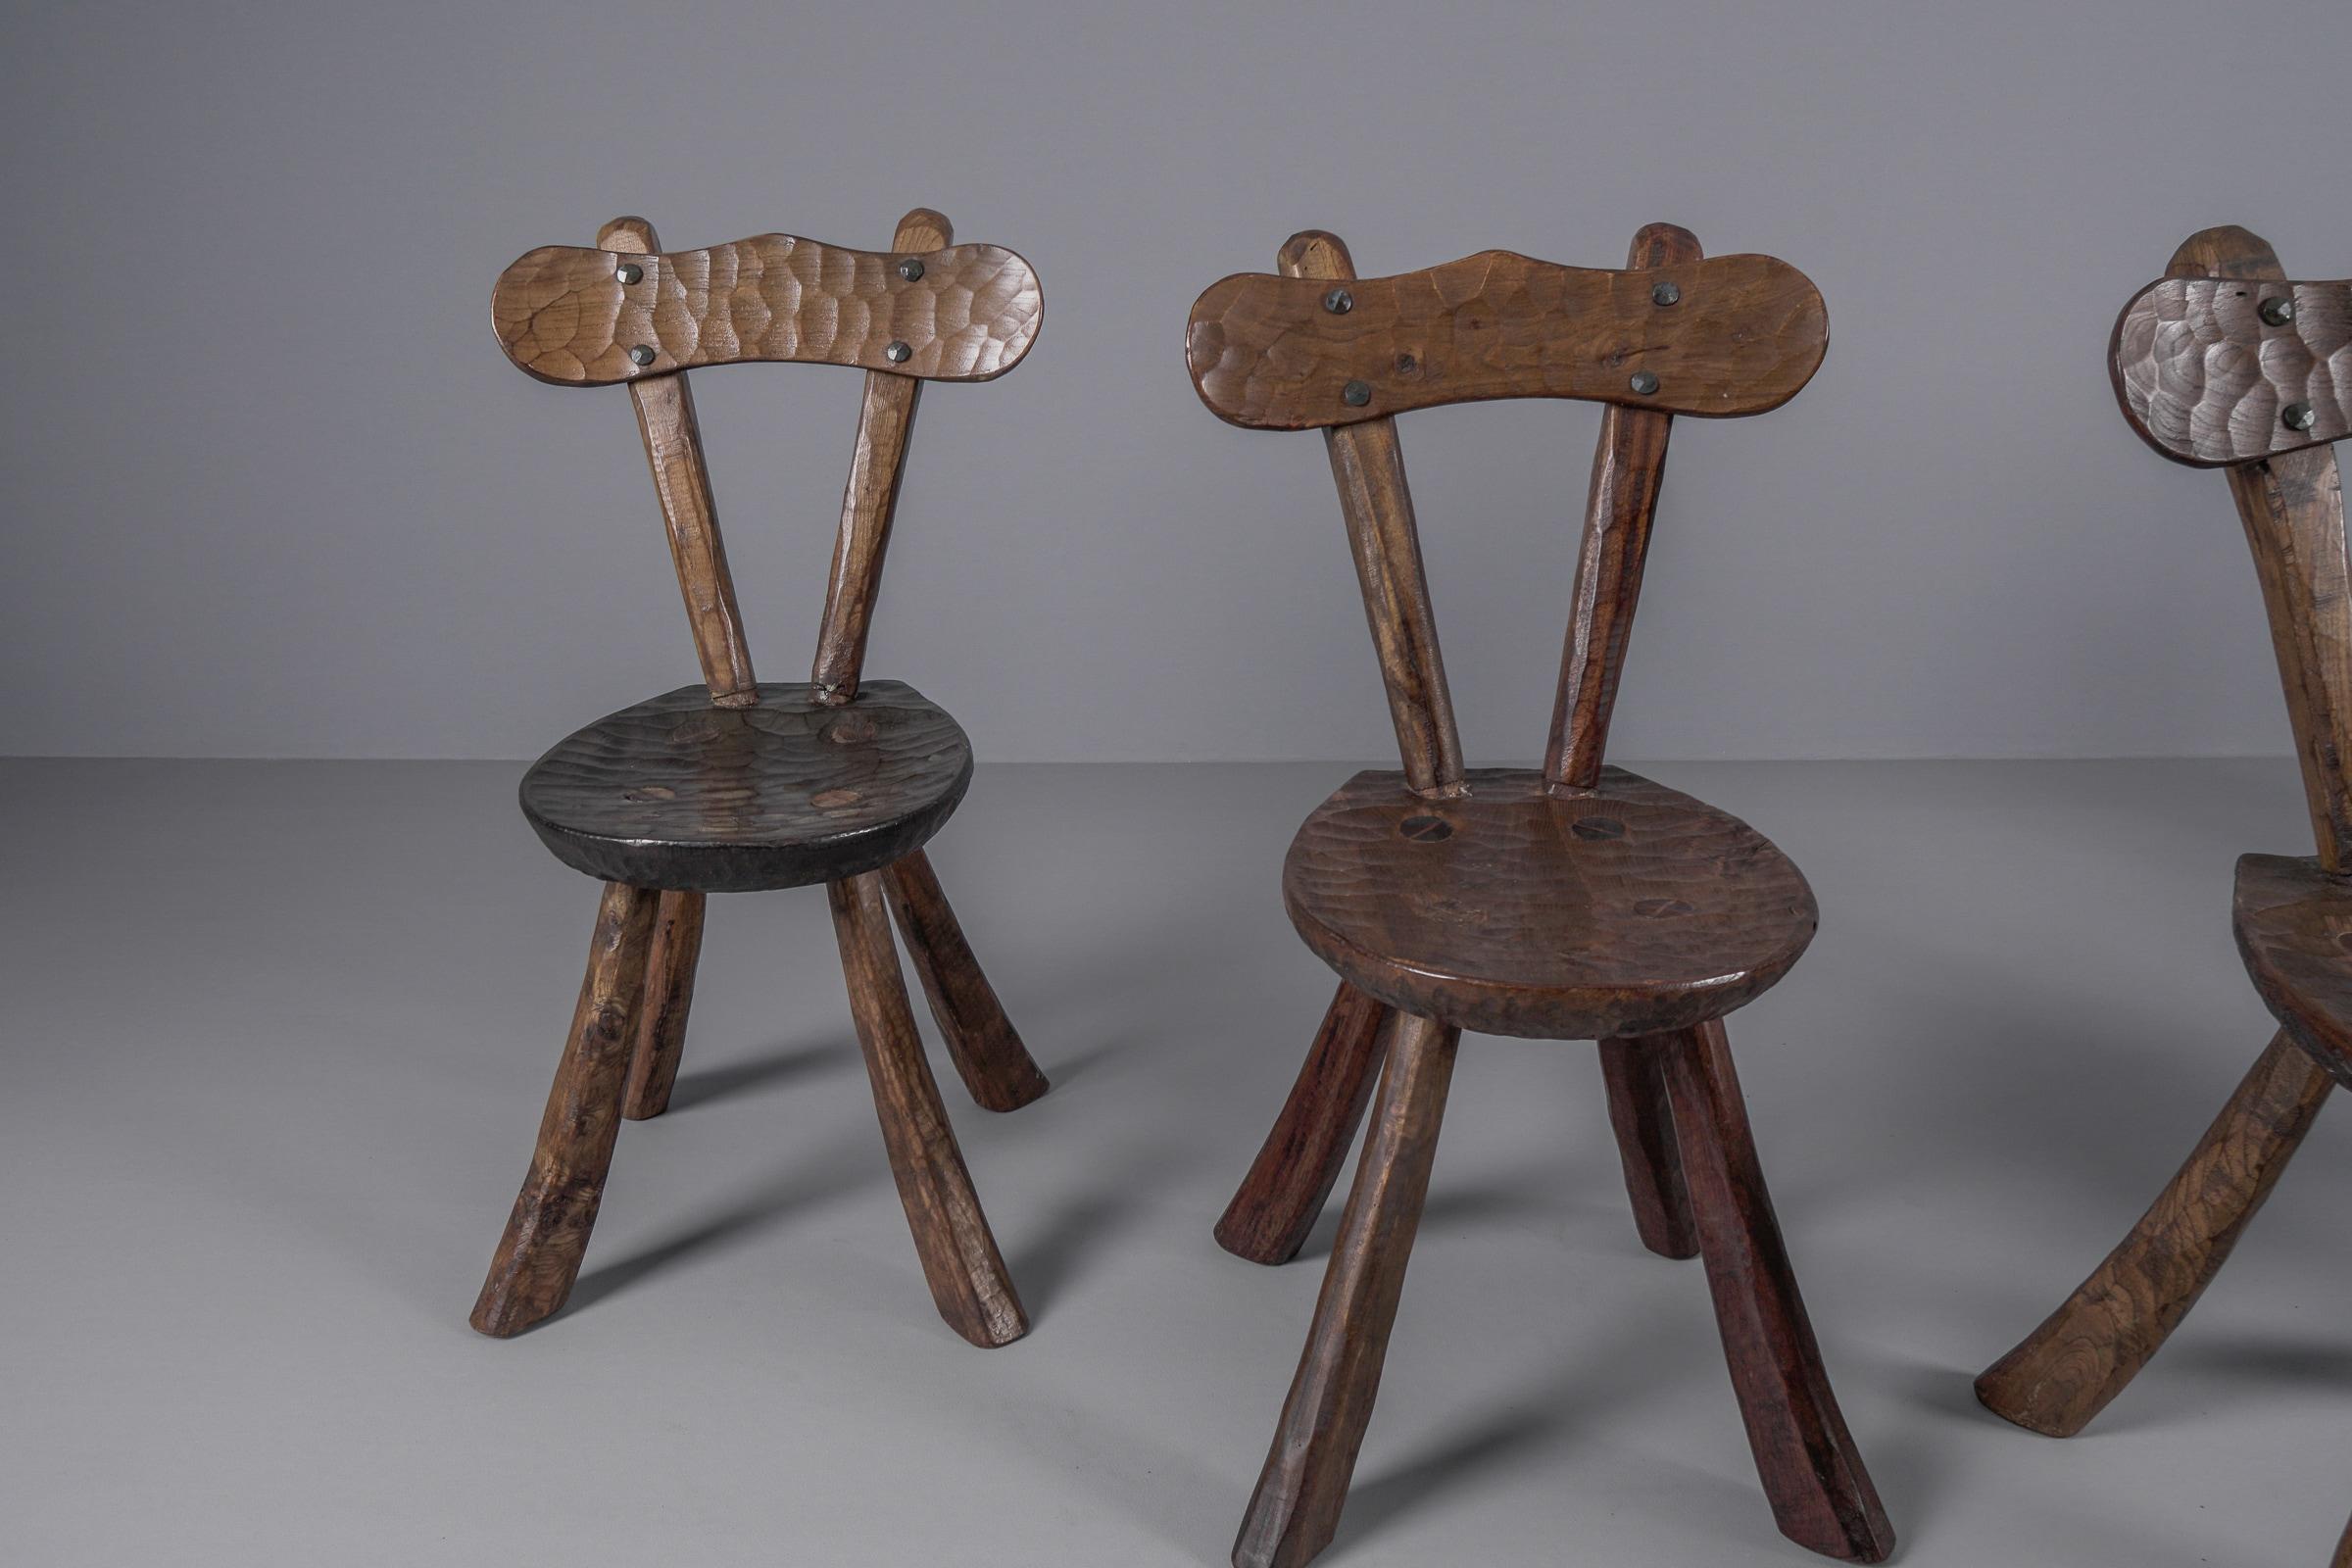 Set of 5 Brutalist Rustic Modern Sculptured Chairs i. t. Style of Alexandre Noll For Sale 5